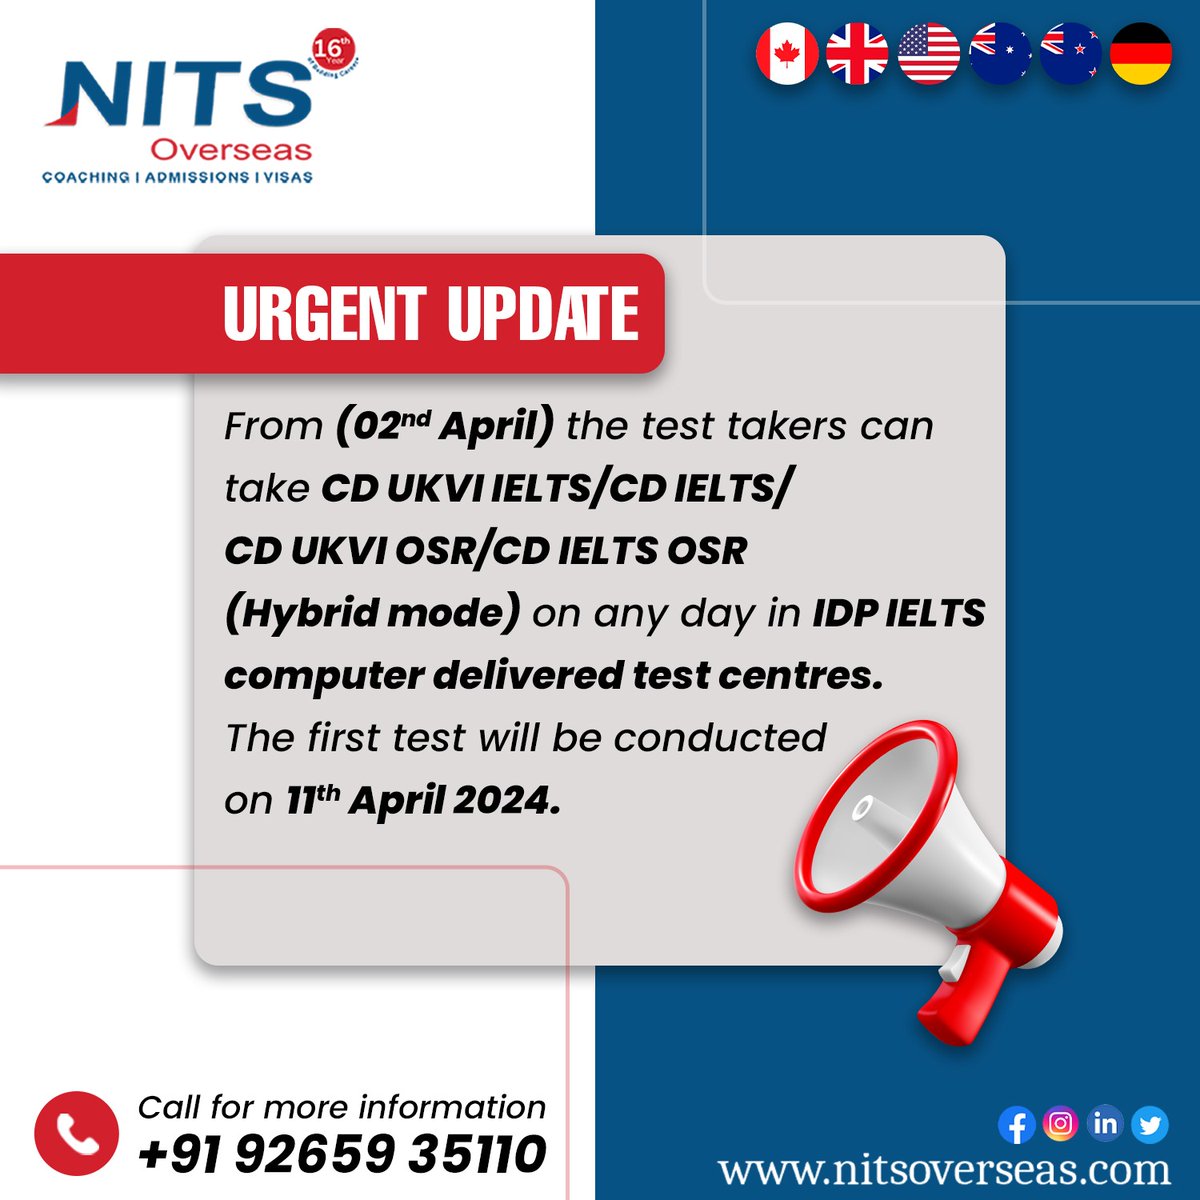 Starting from 2-04-24, test takers now have the flexibility to take CD UKVI IELTS/CD IELTS/CD UKVI OSR/CD IELTS OSR (hybrid mode) on any day at IDP IELTS computer delivered test centers. The 1st test in this new format will be conducted on 11-04-24.📚🎓

📞: +91 9265935110